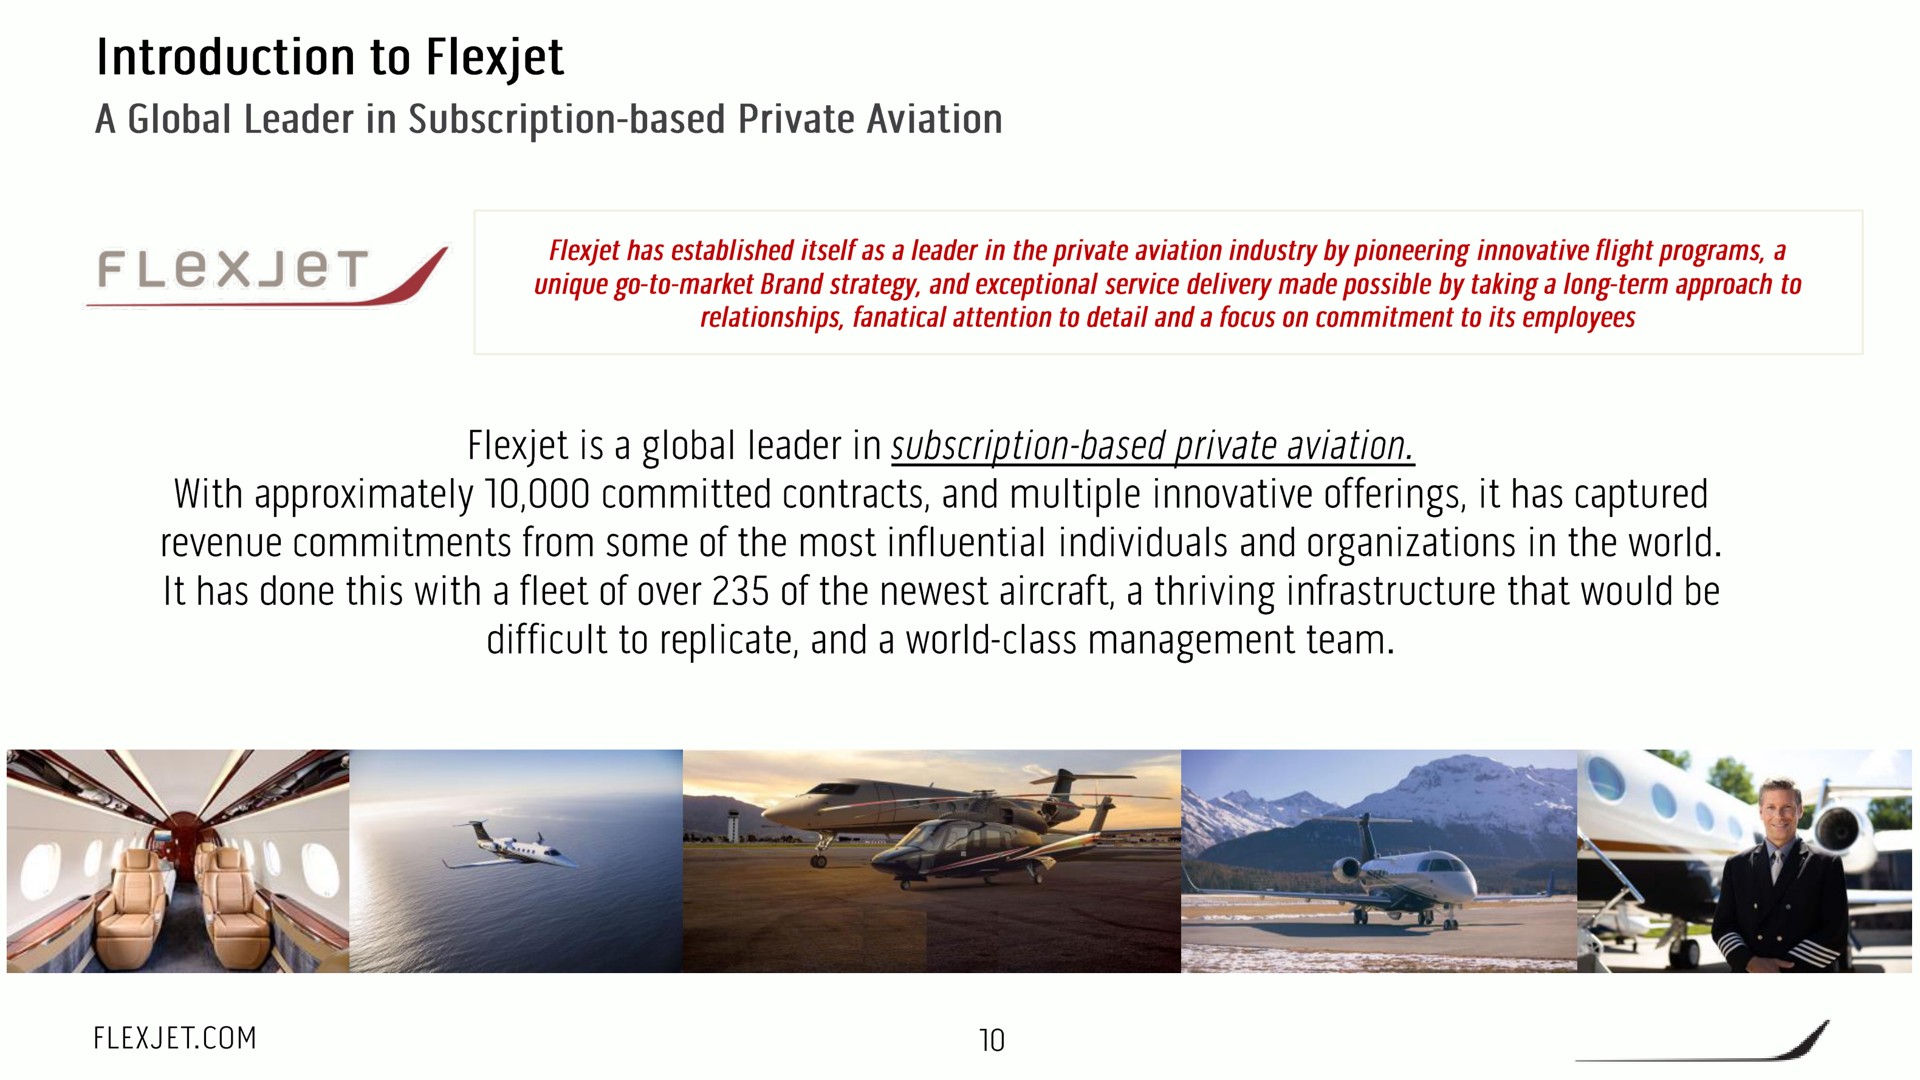 introduction to a global leader in subscription based private aviation is a global leader in subscription based private aviation with approximately committed contracts and multiple innovative offerings it has captured revenue commitments from some of the most influential individuals and organizations in the world it has done this with a fleet of over of the aircraft a thriving infrastructure that would be difficult to replicate and a world class management team | FlexJet